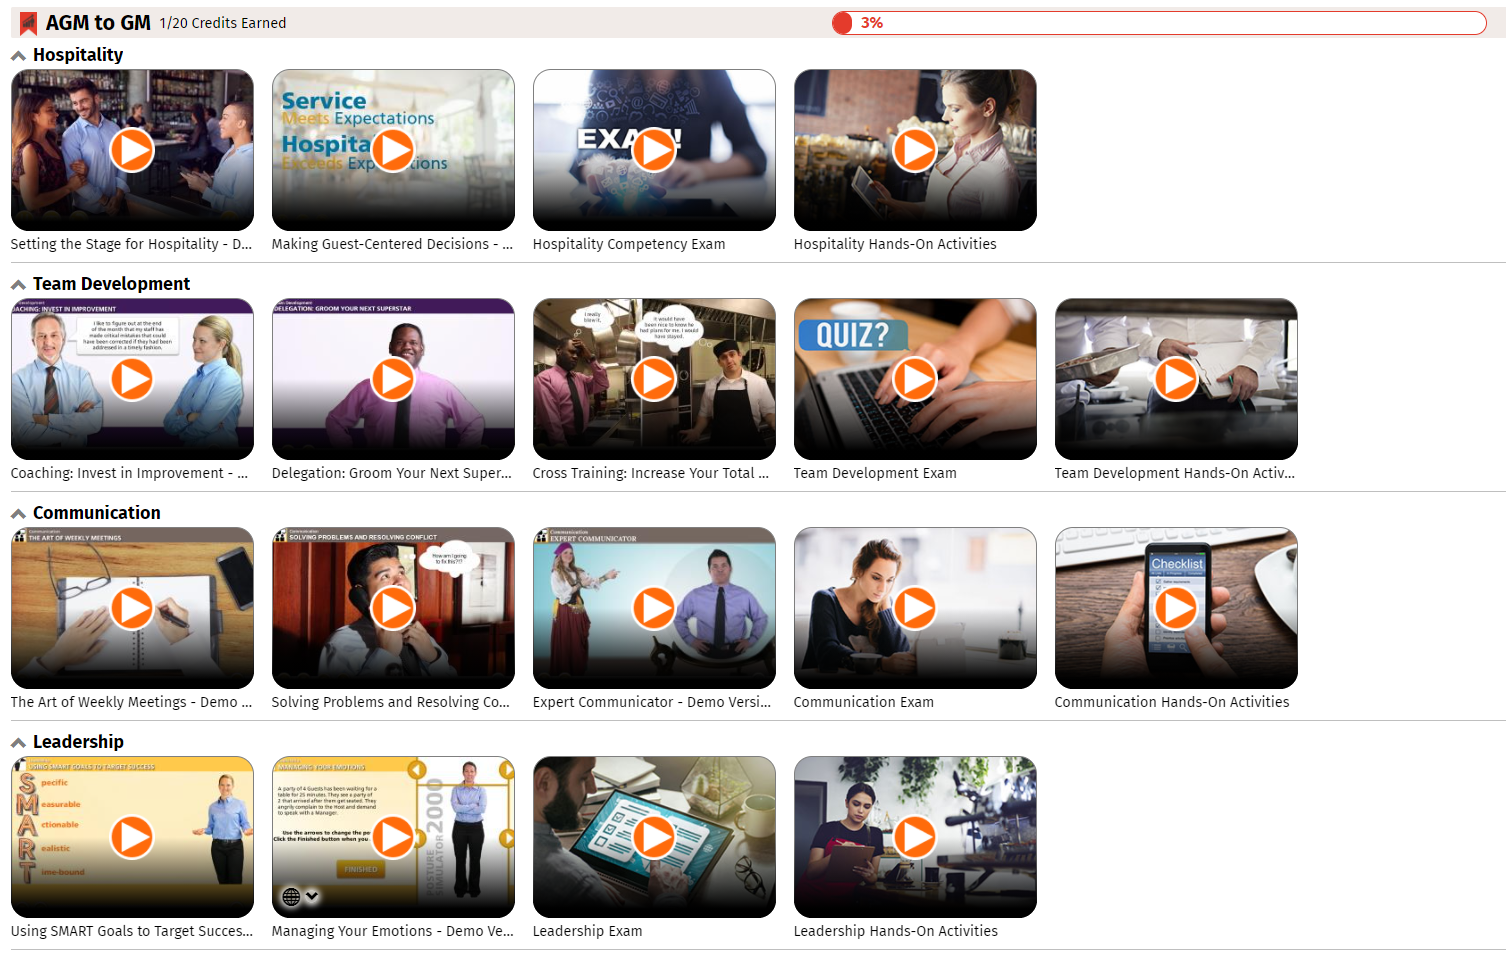 DiscoverLink Talent LMS Software - Thumbnails of Content Items